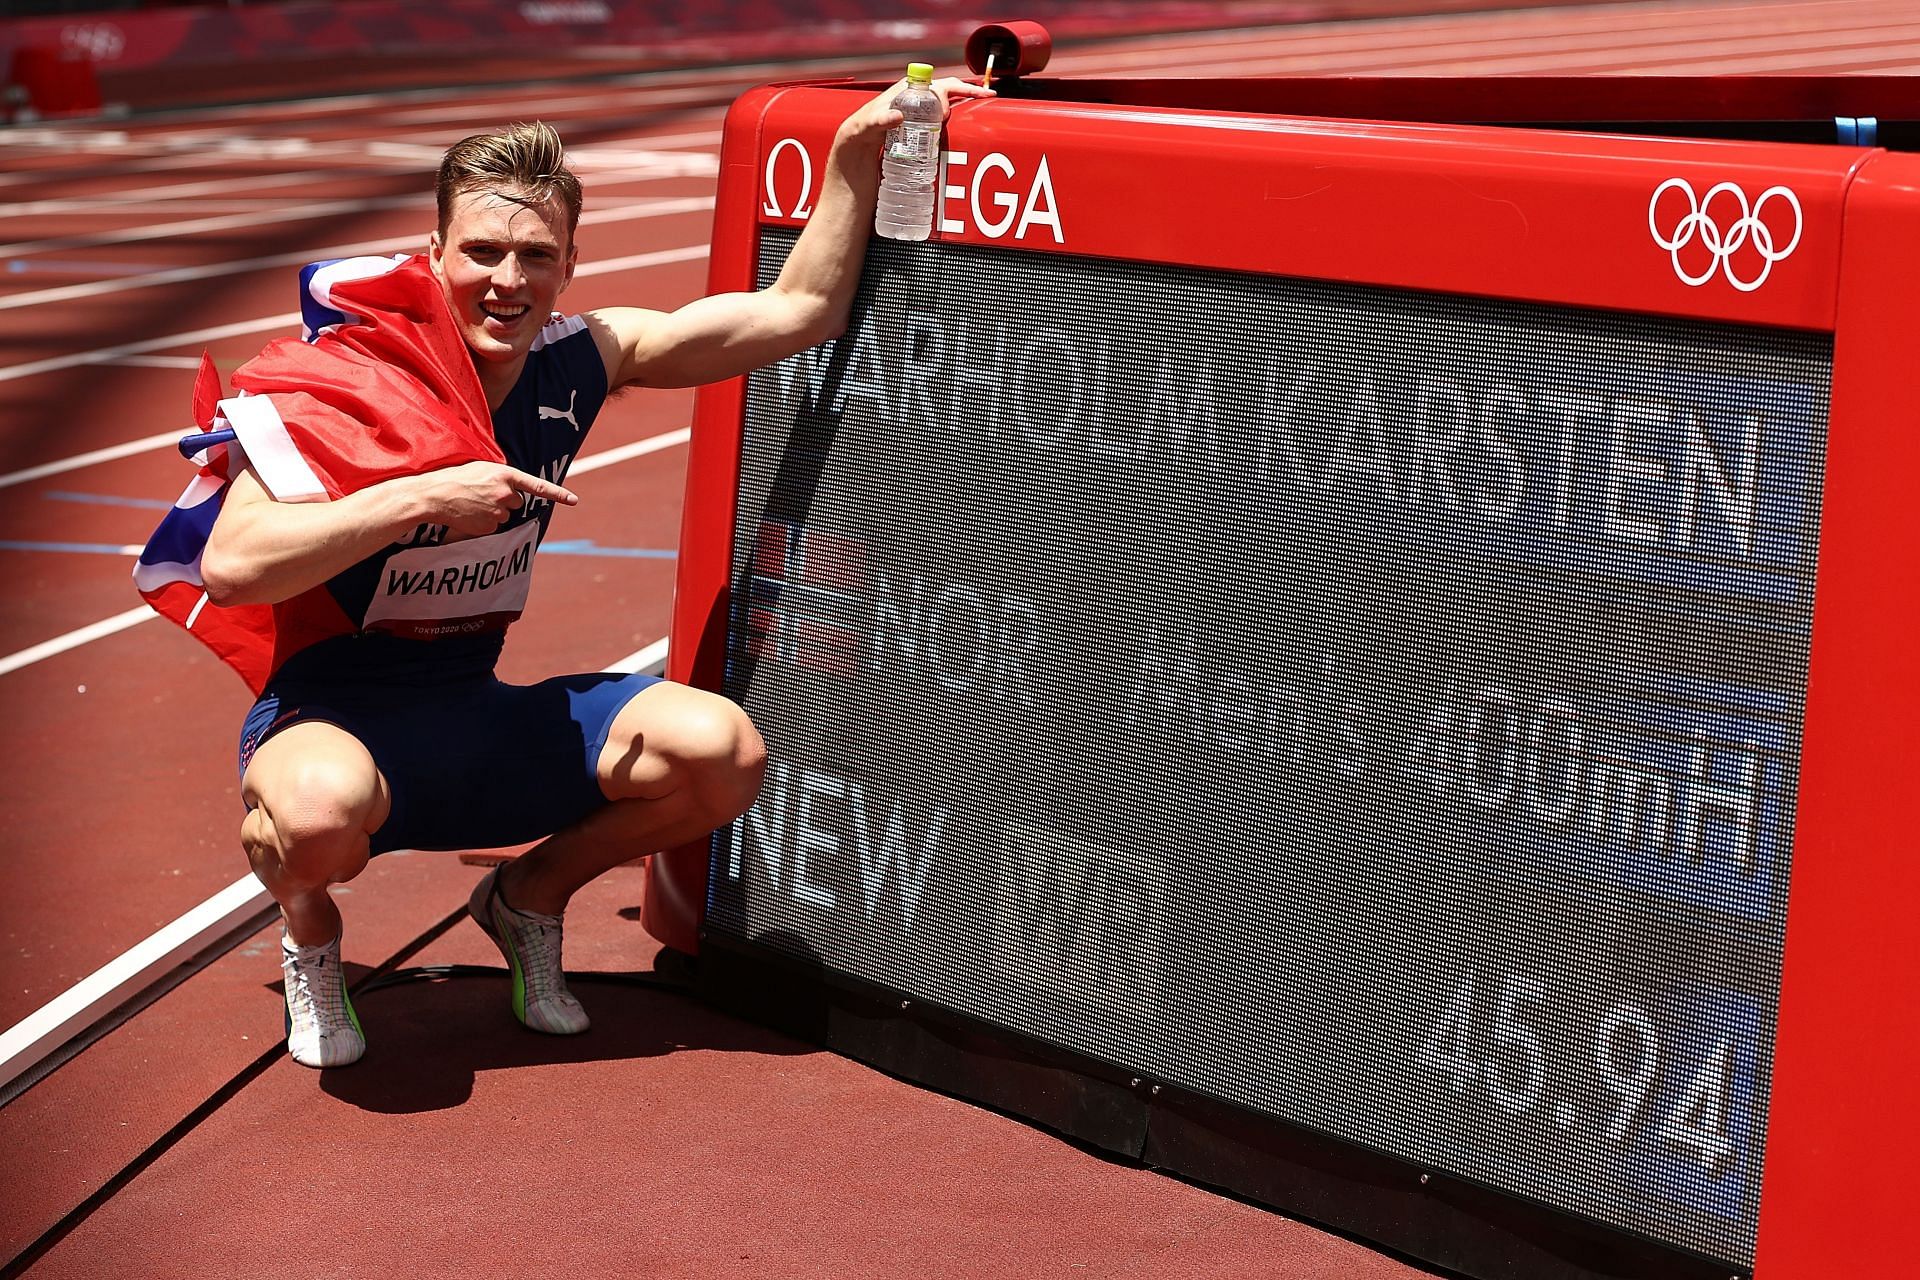 Karsten Warholm of Team Norway poses with a scoreboard showing his new world record time after winning the gold medal in the Men&#039;s 400m Hurdles Final at the 2020 Olympic Games in Tokyo, Japan.